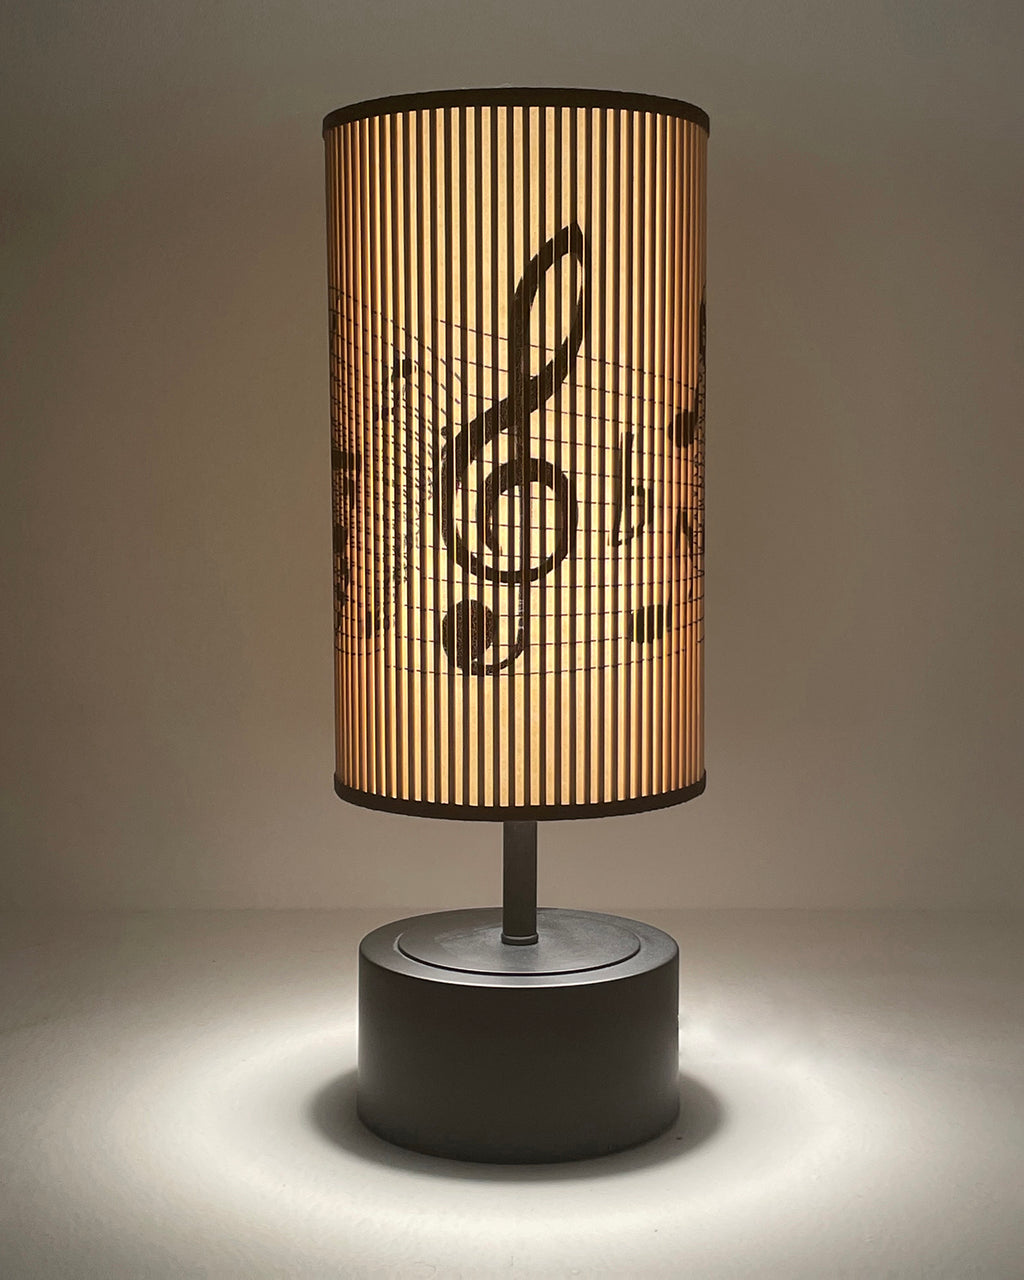 Music Note Printed Stick Shade, Touch Lamp, Black Base